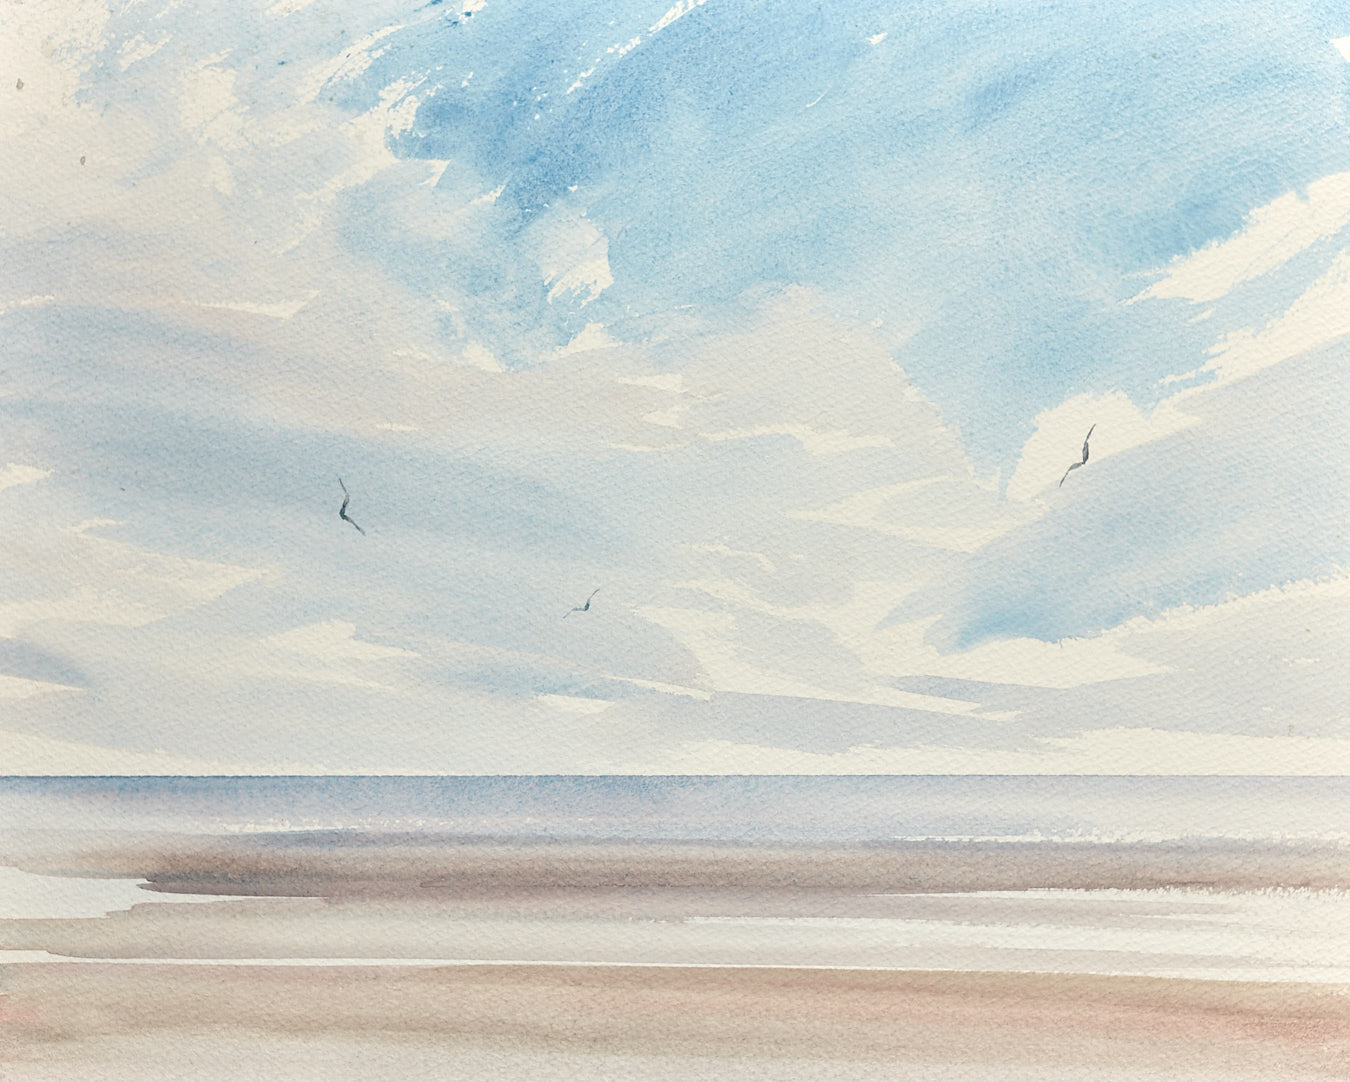 Large image of Summer Beach, Lytham St Annes original watercolour painting